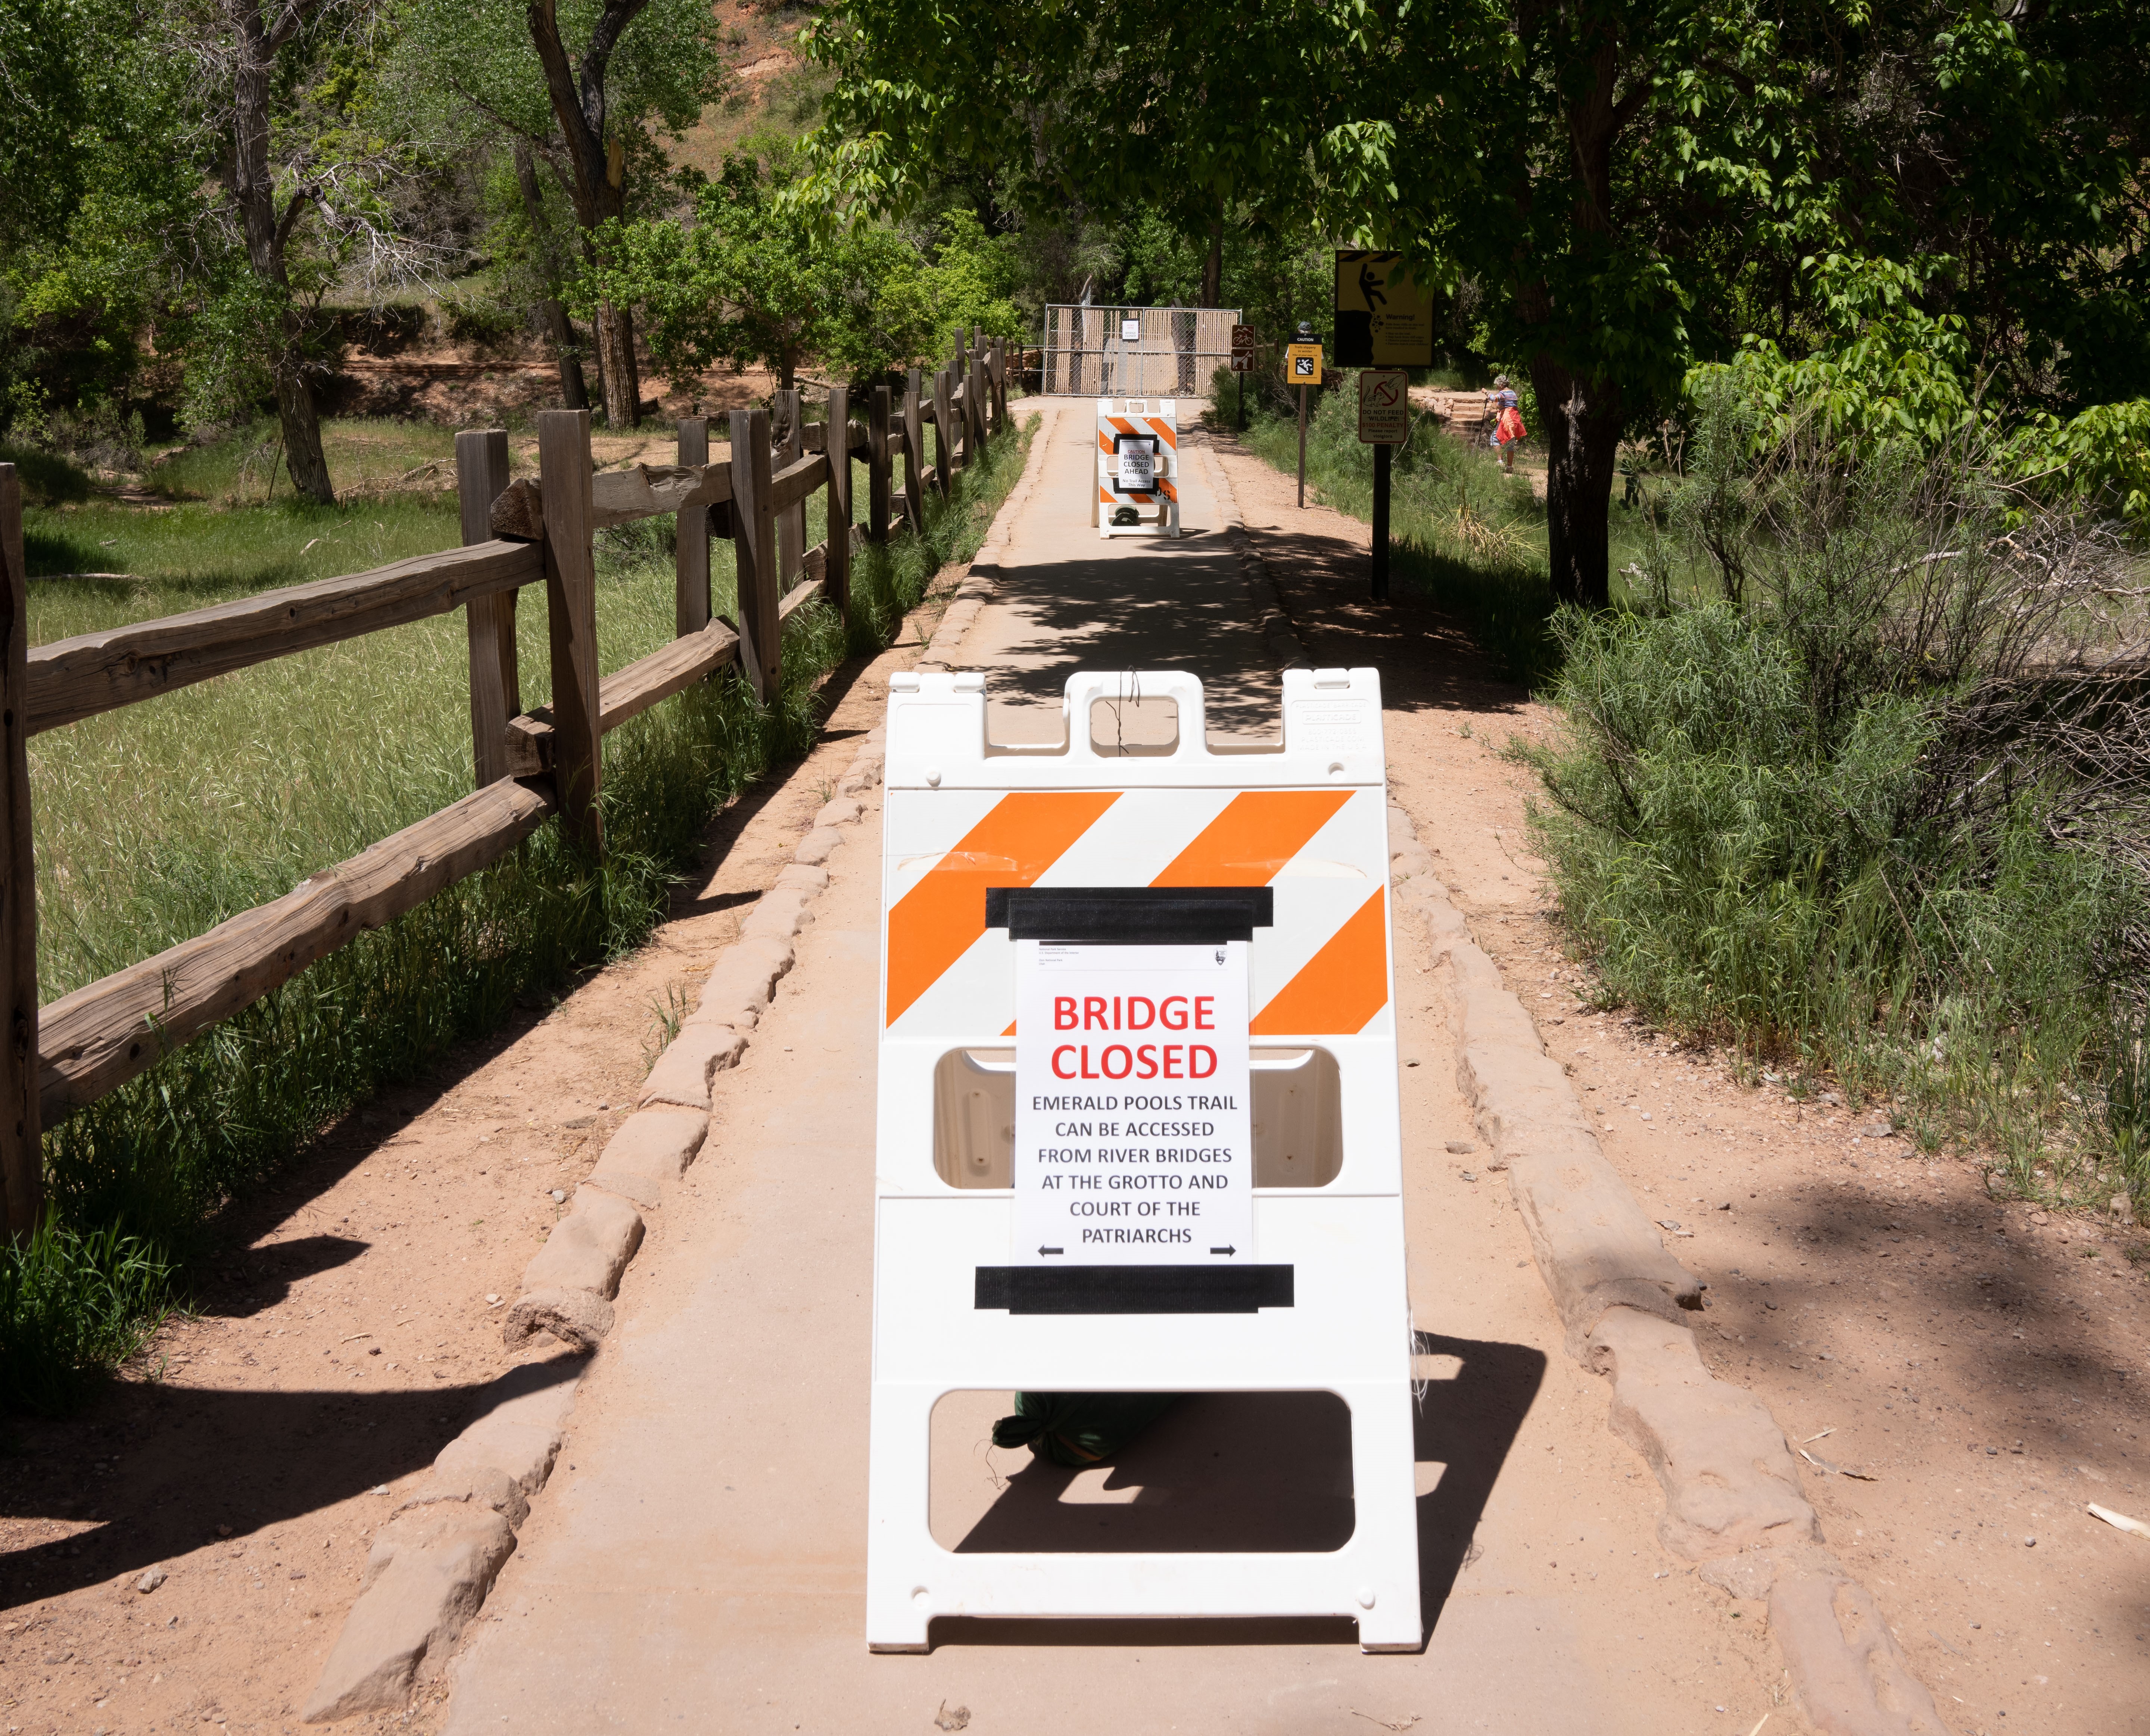 Folding sign in front of a bridge on a paved path. Sign reads "Bridge Closed. Emerald Pools Trail Can be Accessed from Bridges at the Grotto and the Court of the Patriarchs"